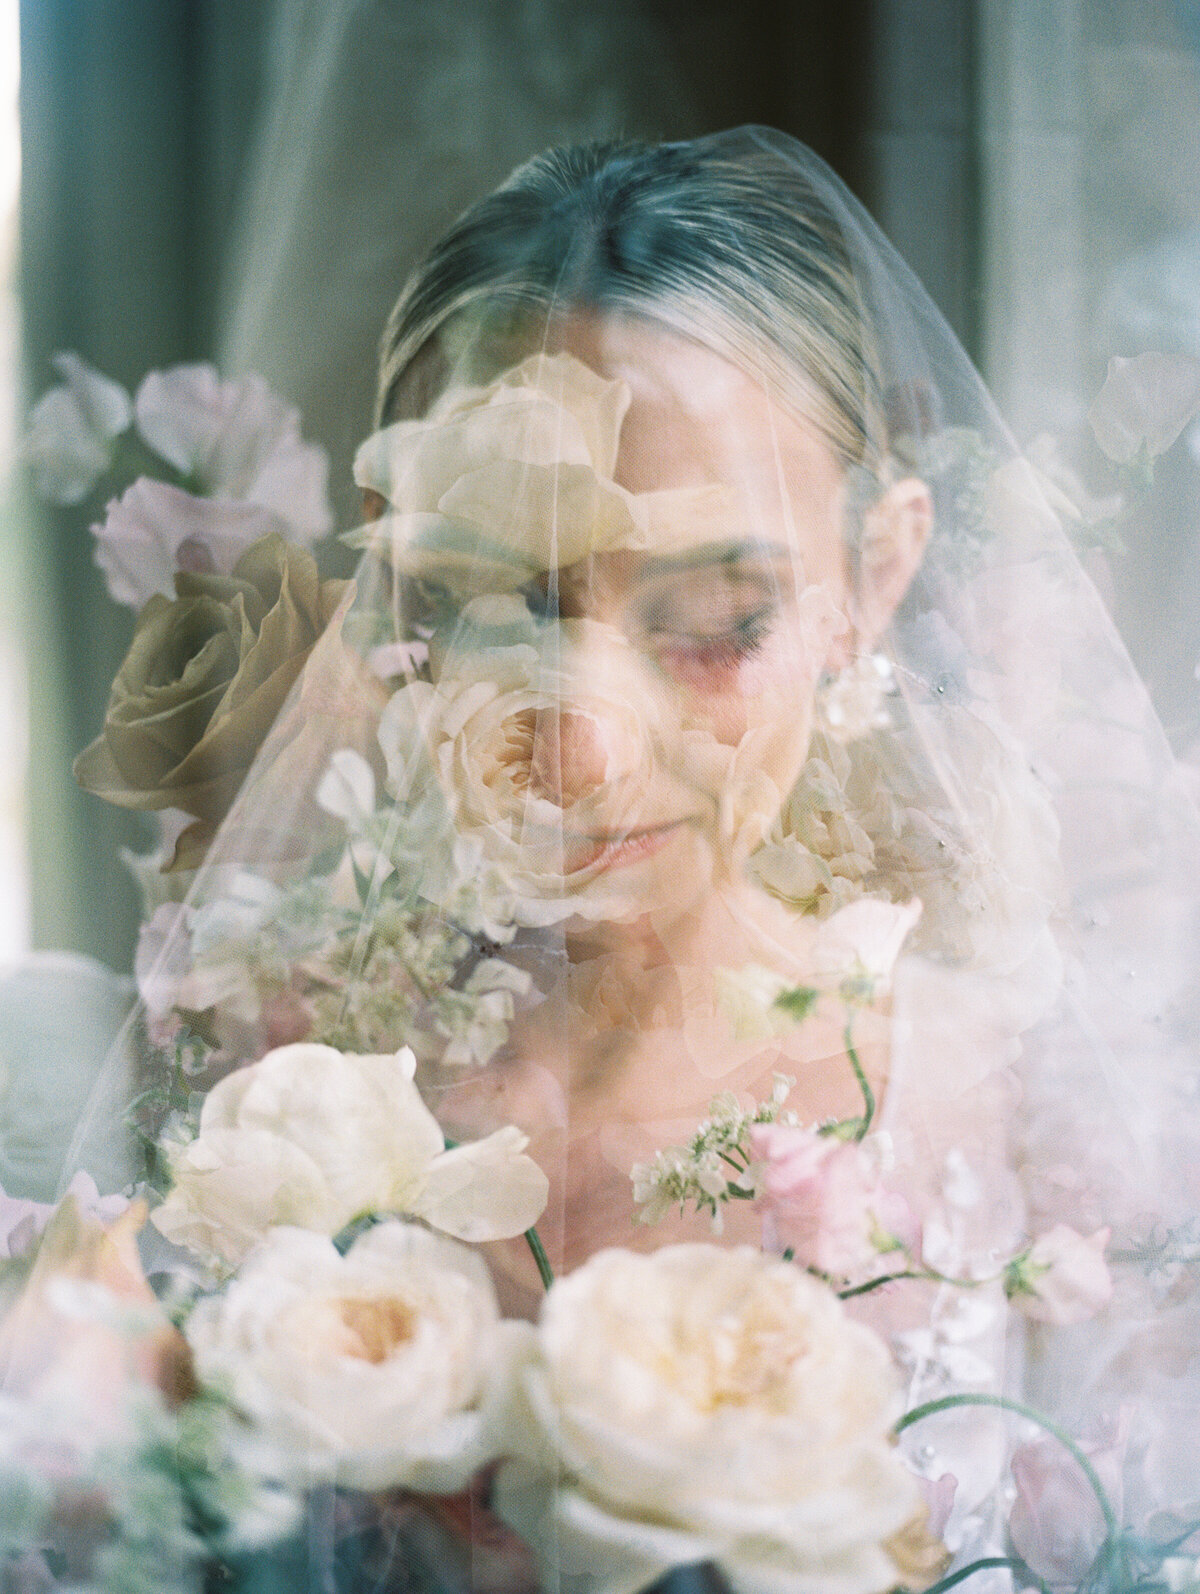 bride with veil in chateau before wedding ceremony with flowers